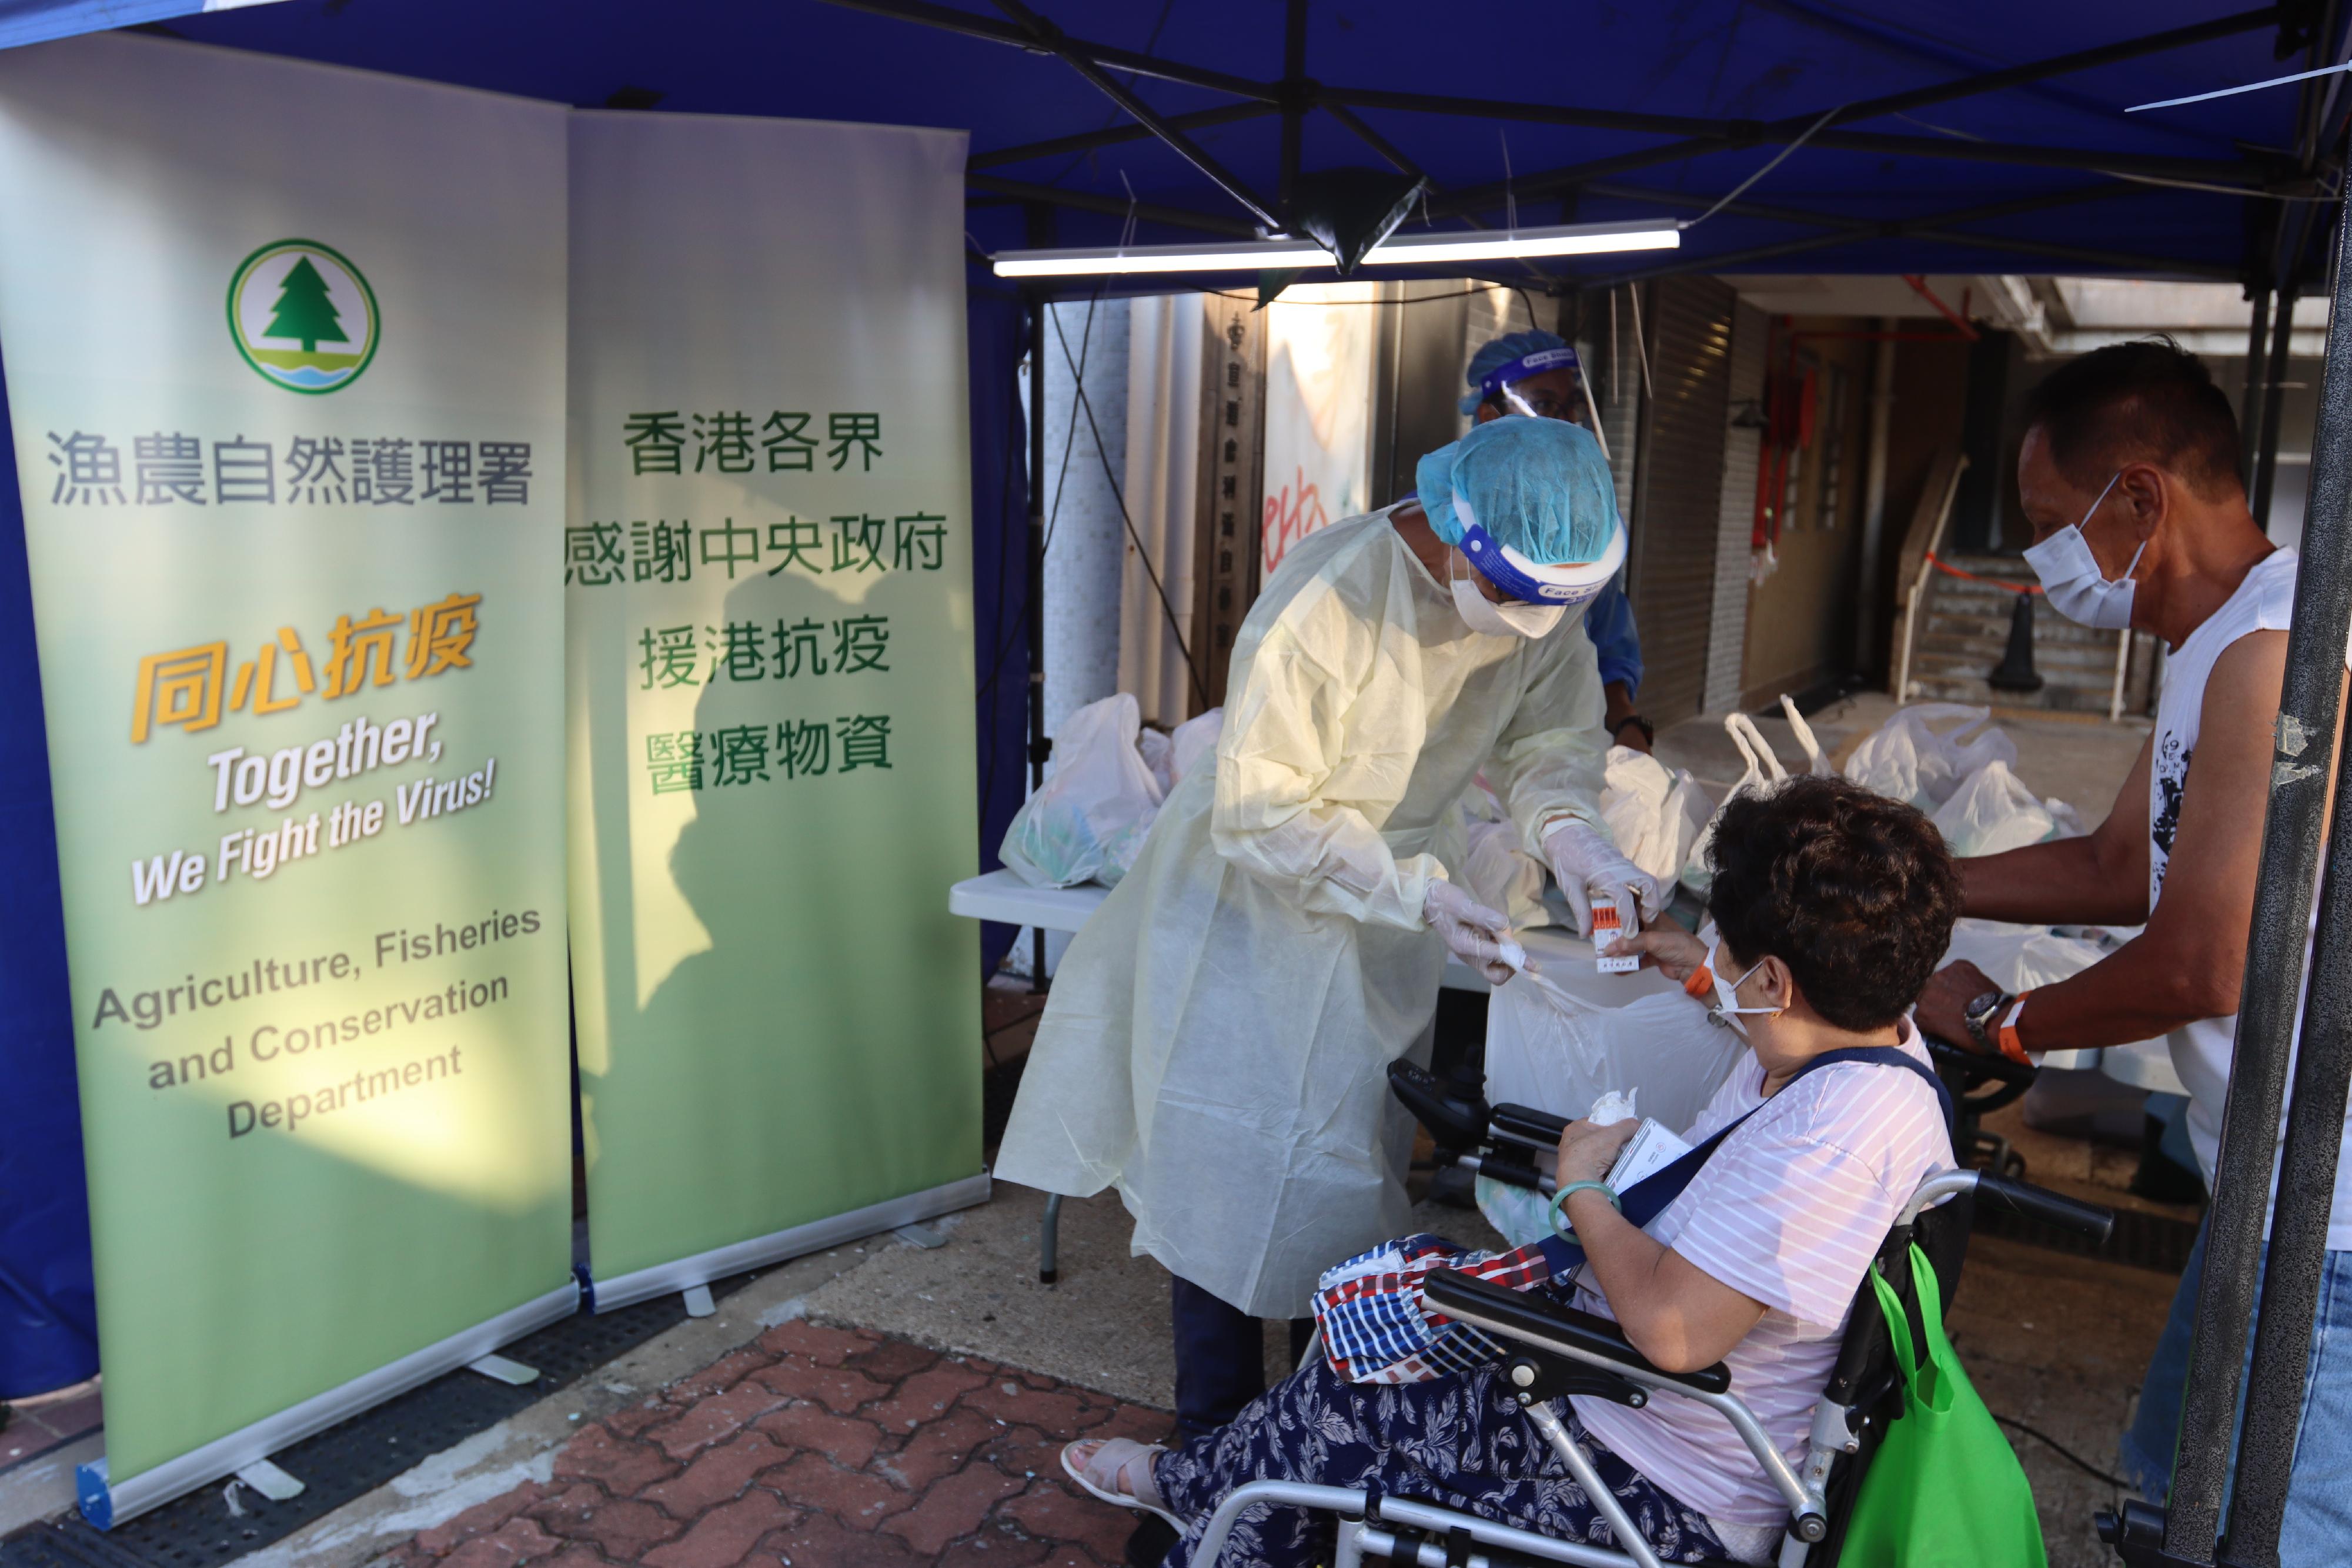 The Government yesterday (July 21) enforced "restriction-testing declaration" and compulsory testing notice in respect of specified "restricted area" in Lei Moon House, Ap Lei Chau Estate, Aberdeen. Photo shows a staff member of the Agriculture, Fisheries and Conservation Department distributing food packs and rapid antigen test kits, as well as anti-epidemic proprietary Chinese medicine donated by the Central People's Government, to residents subject to compulsory testing.